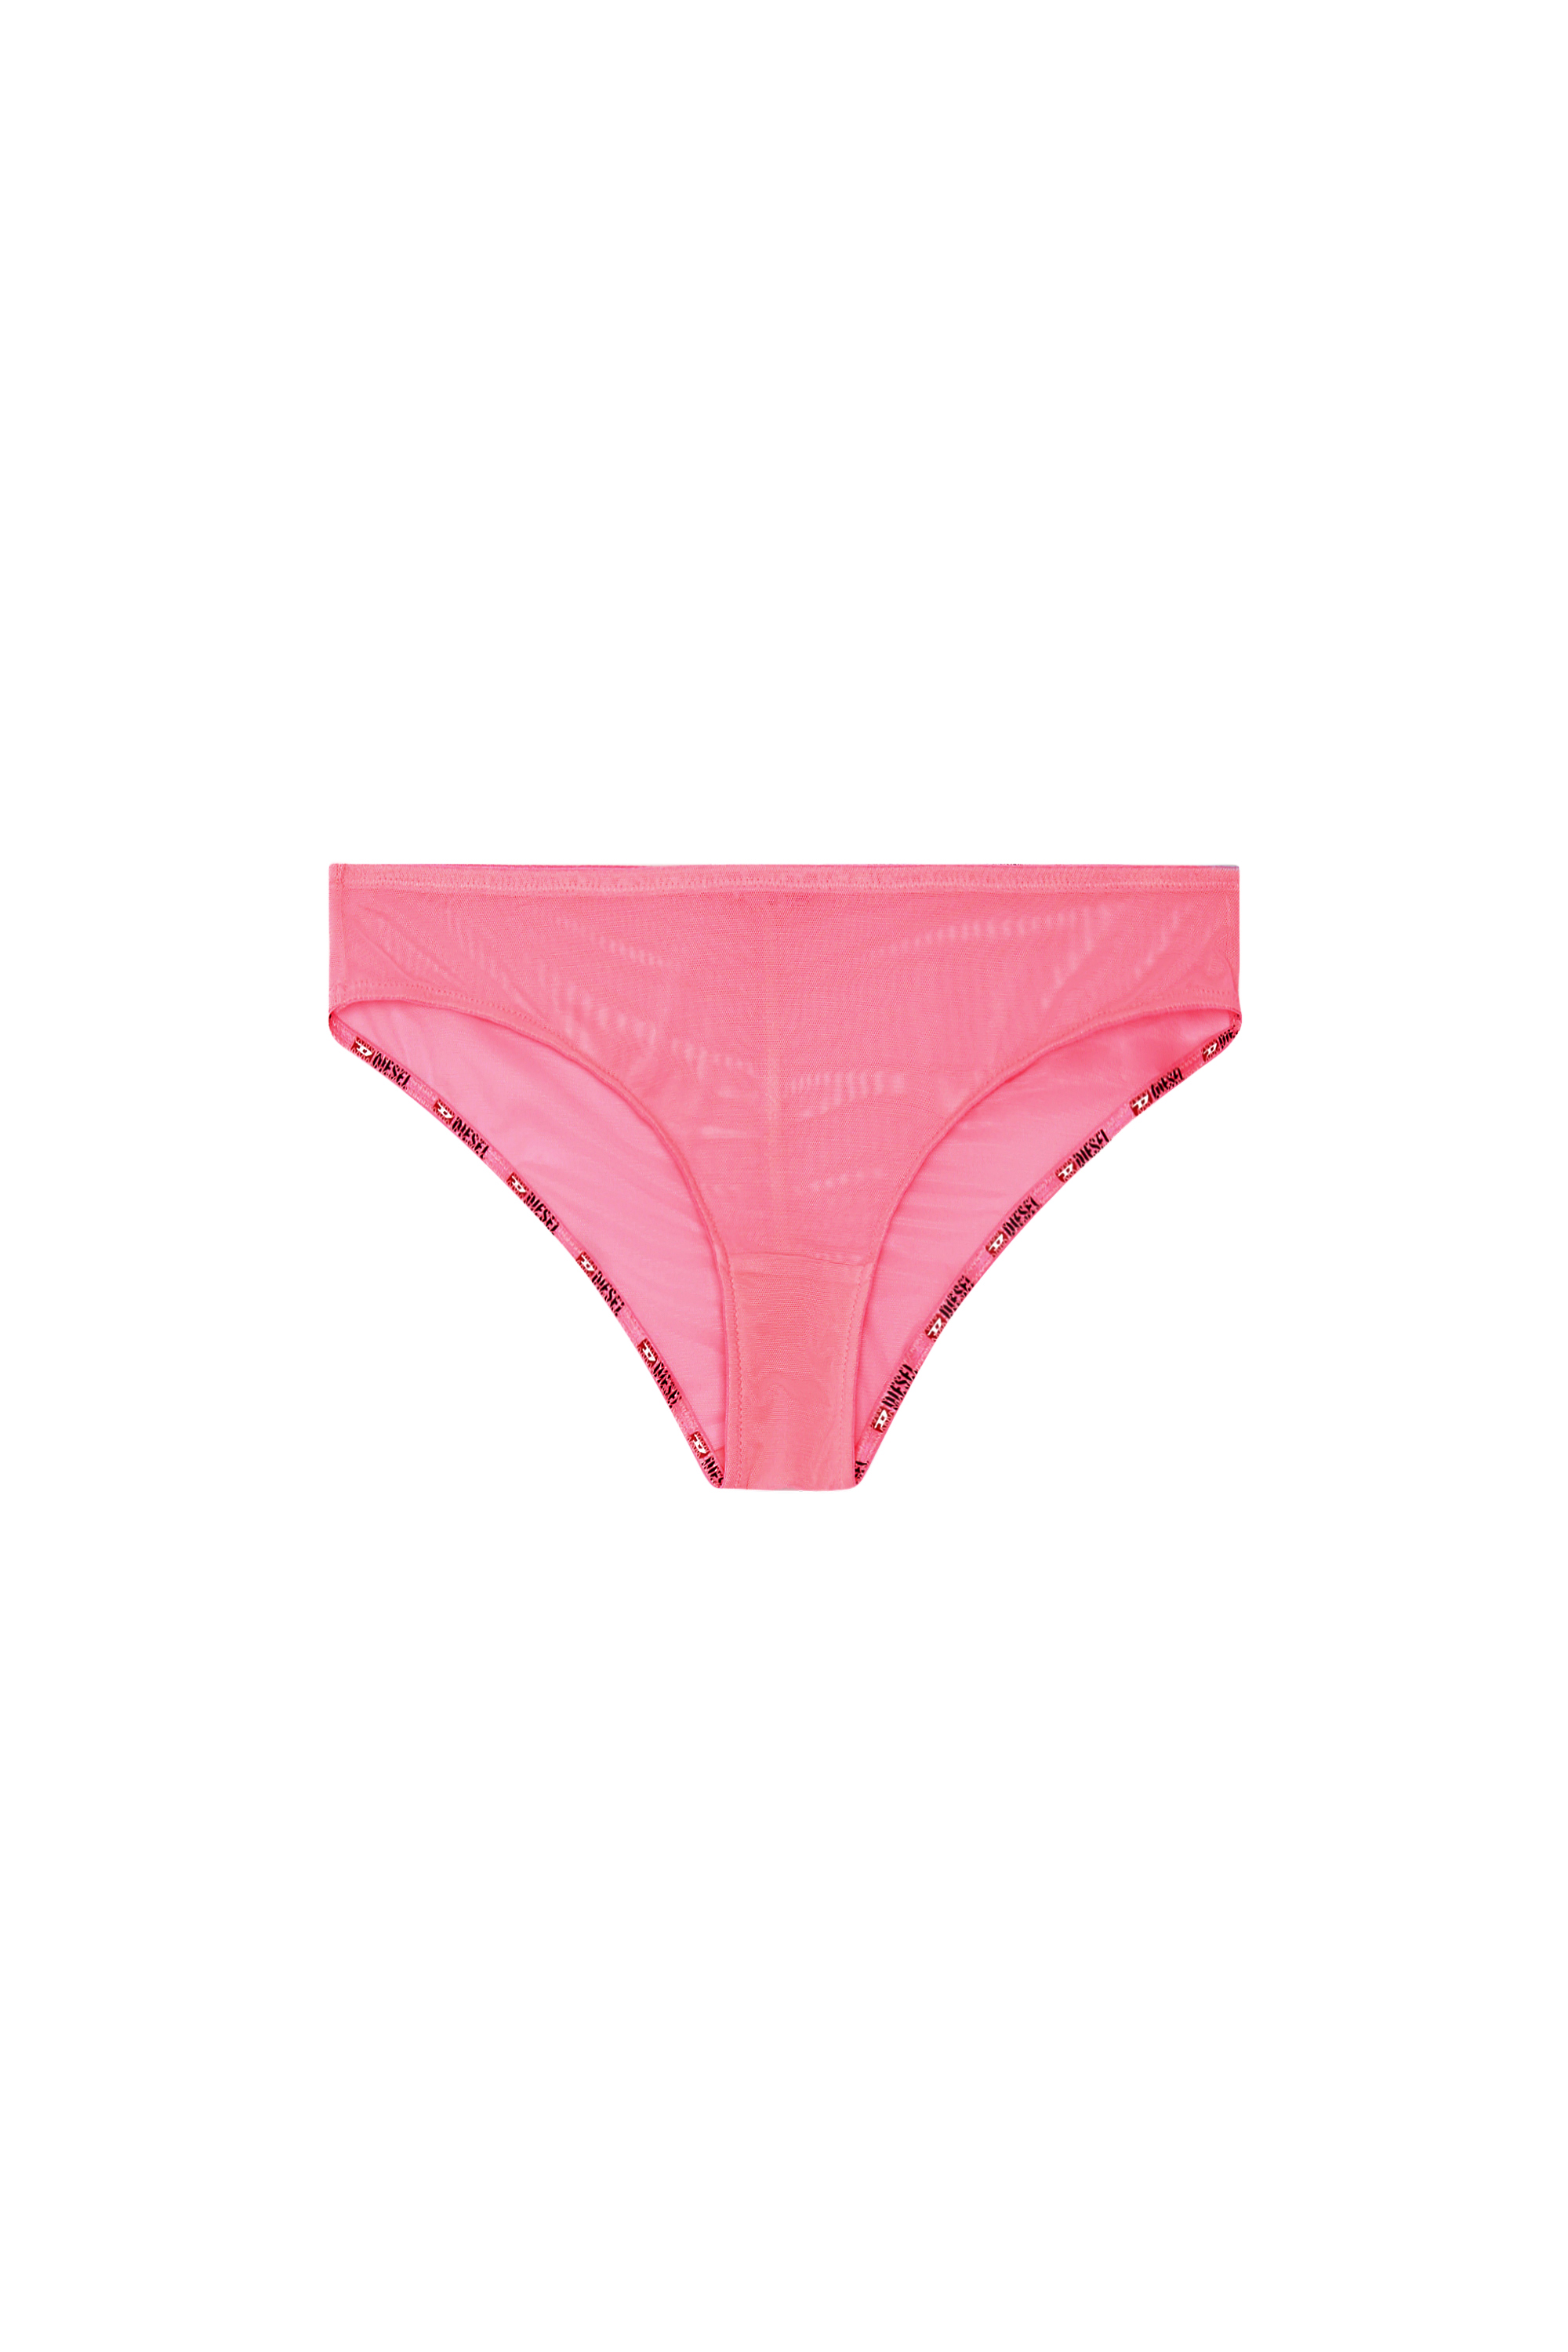 Wanther Women Hipster Red, Pink, Green Panty - Buy Wanther Women Hipster  Red, Pink, Green Panty Online at Best Prices in India